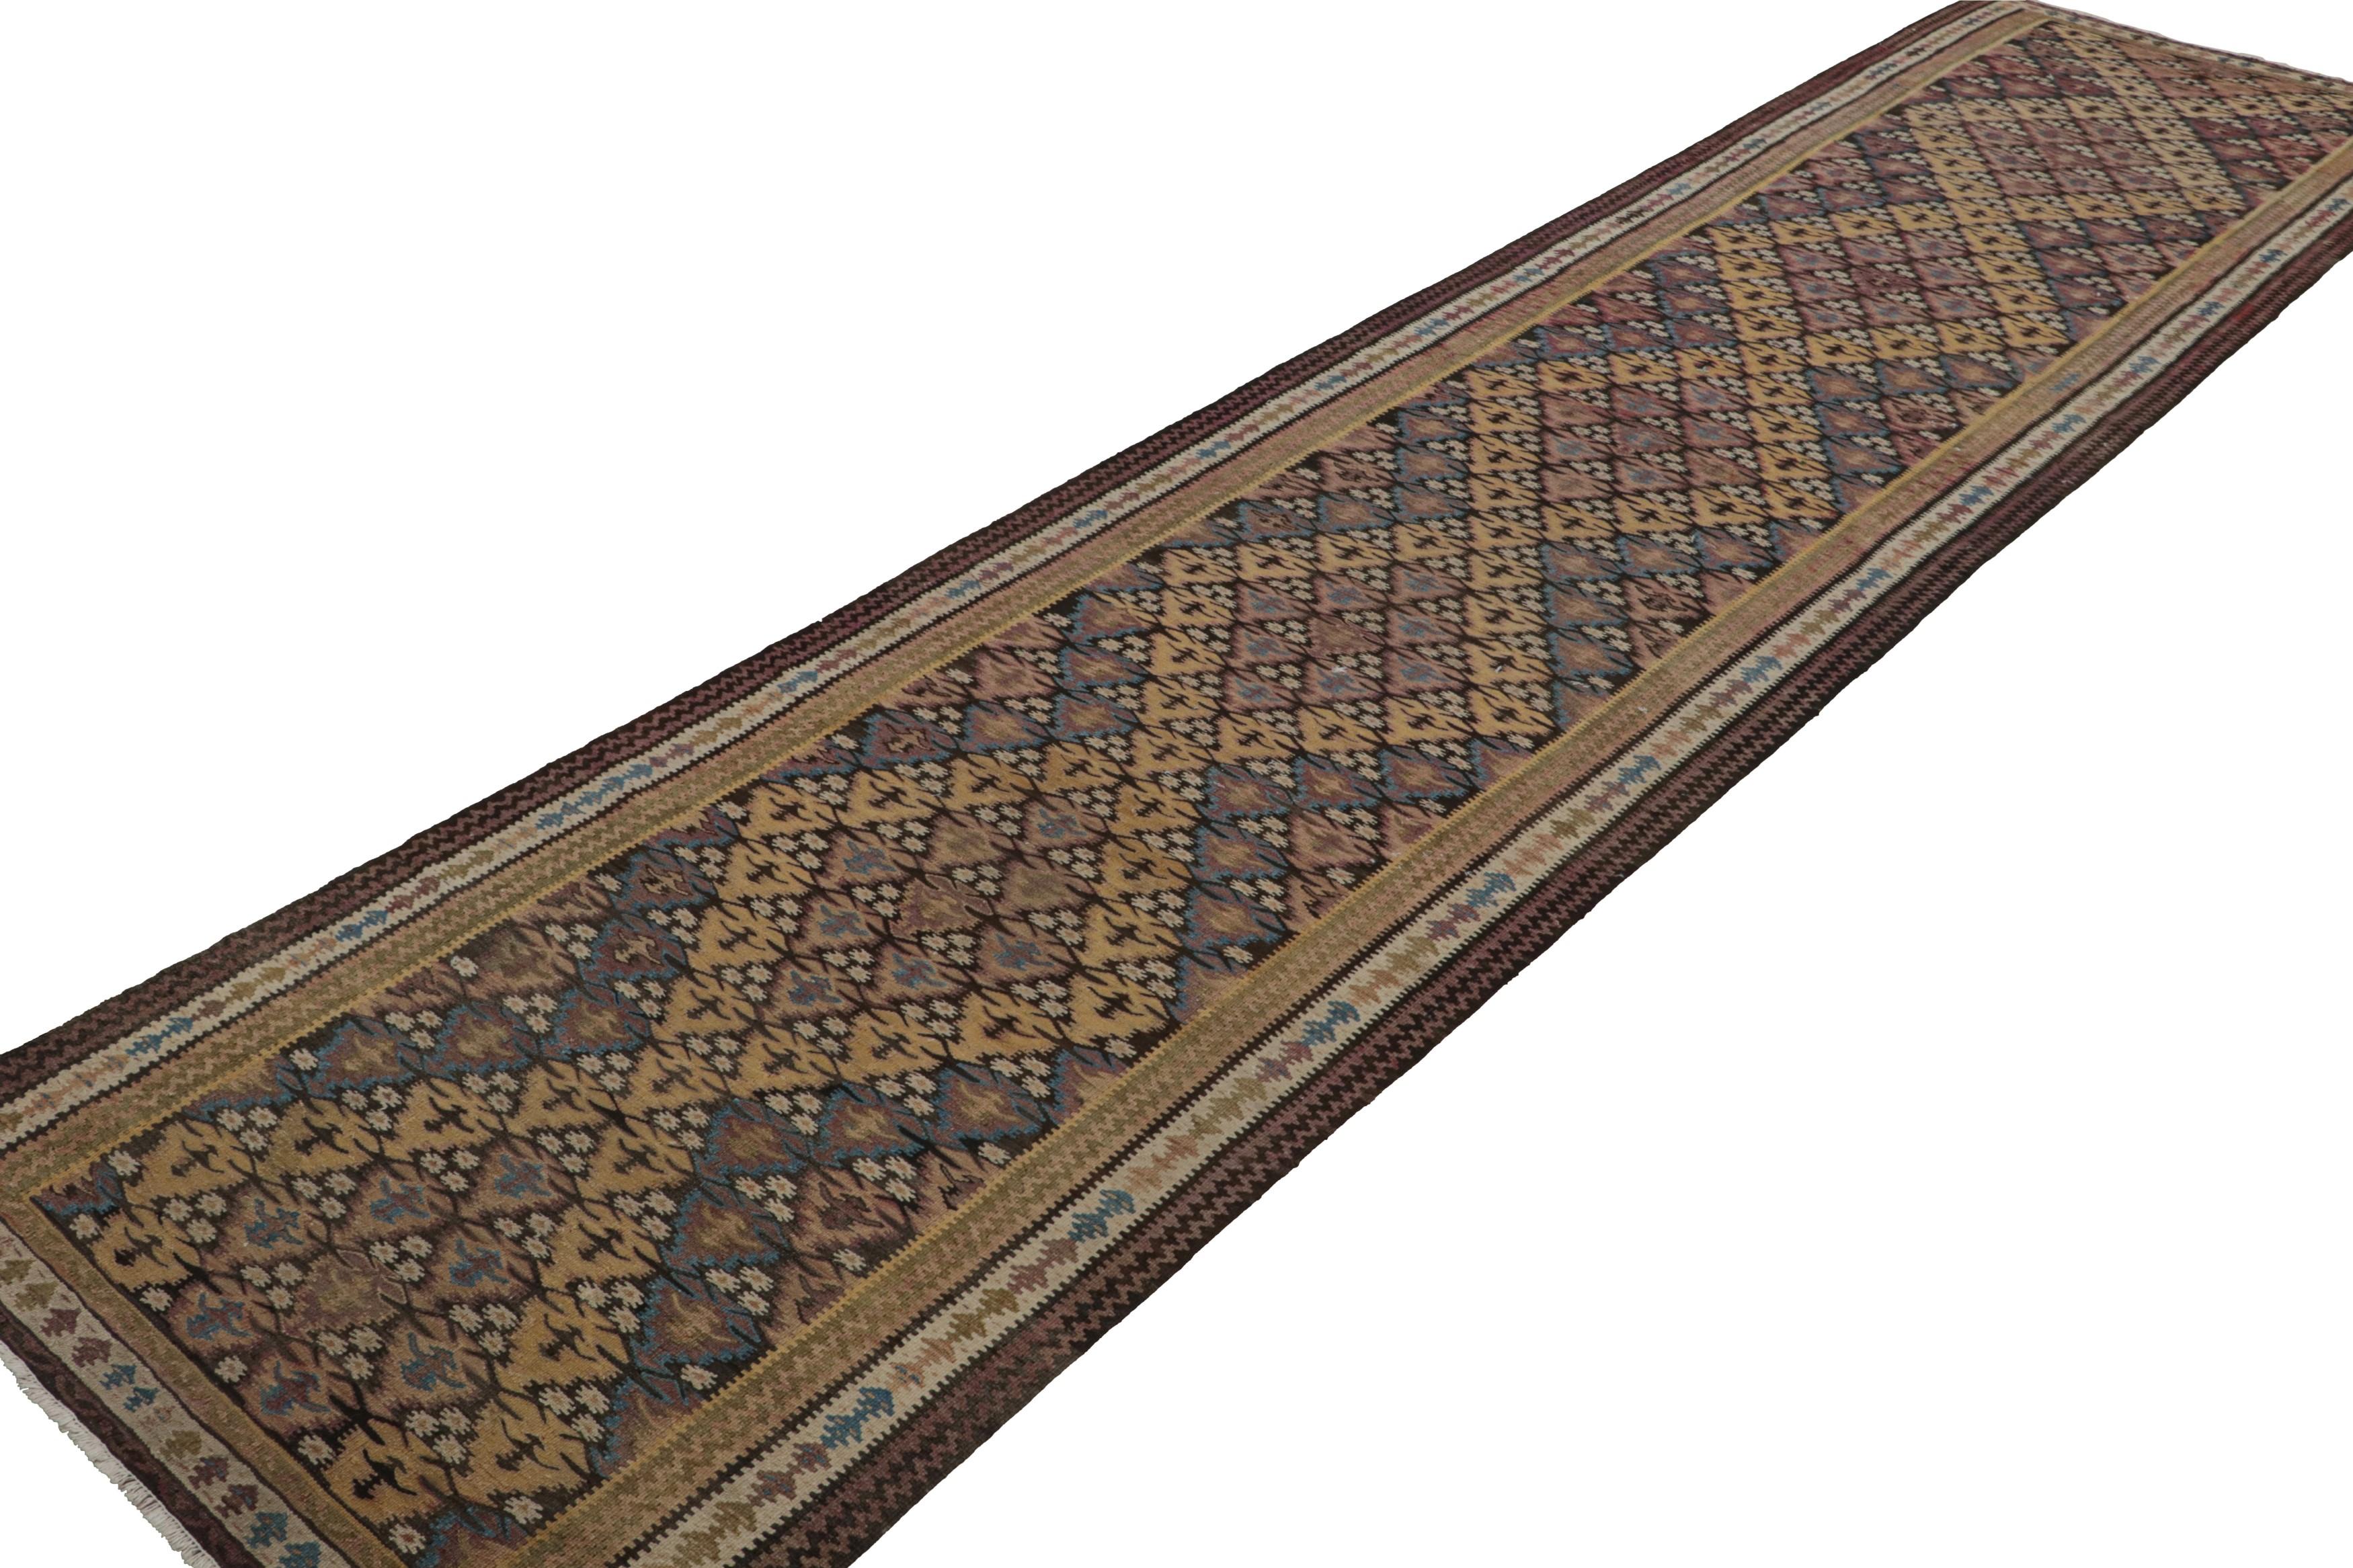 Handwoven in wool circa 1950-1960, this 3x15 vintage Persian tribal Kilim and extra-long runner rug is a rare curation. Its design enjoys mosaic-like geometric patterns in gold, beige-brown, blue and pink, resembling those of a rare limited series. 